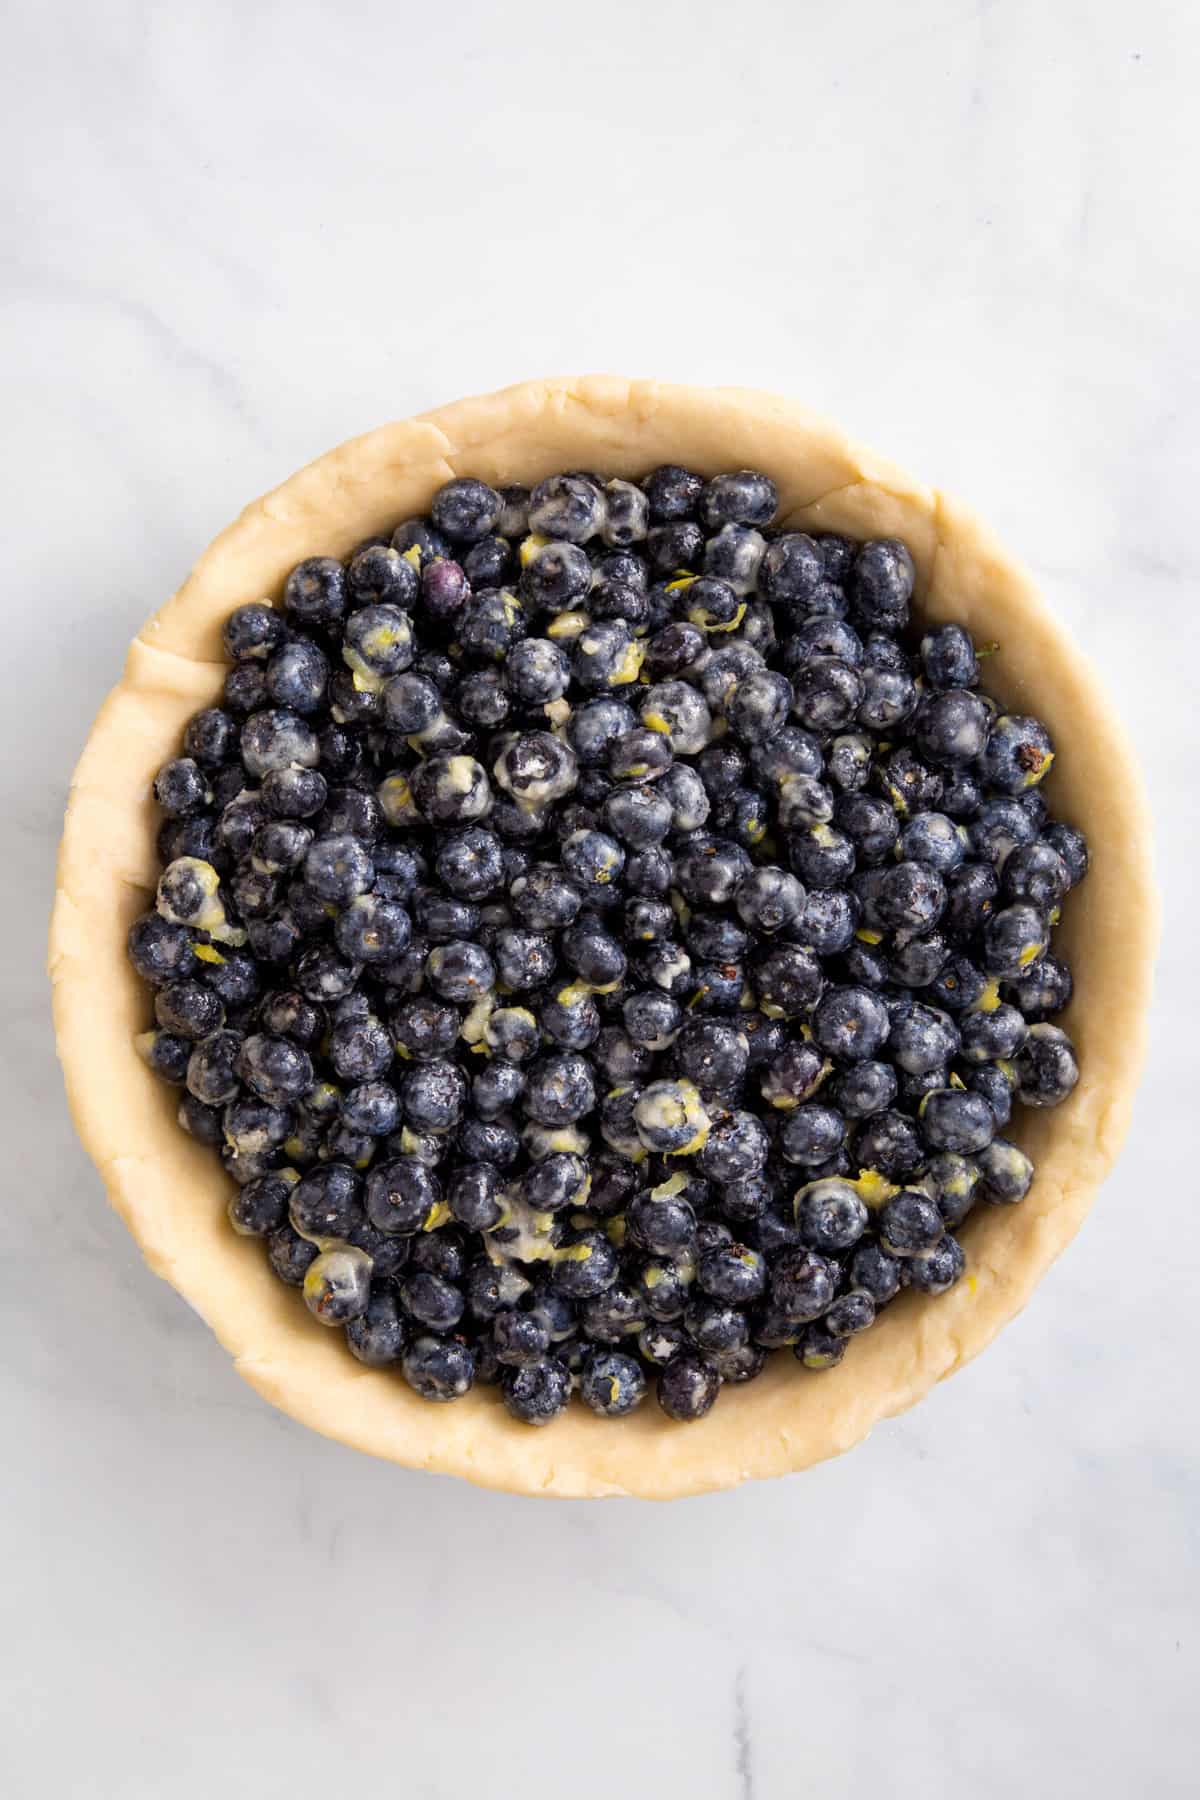 fresh blueberry and lemon zest filling poured into a prepared pie crust-lined pan